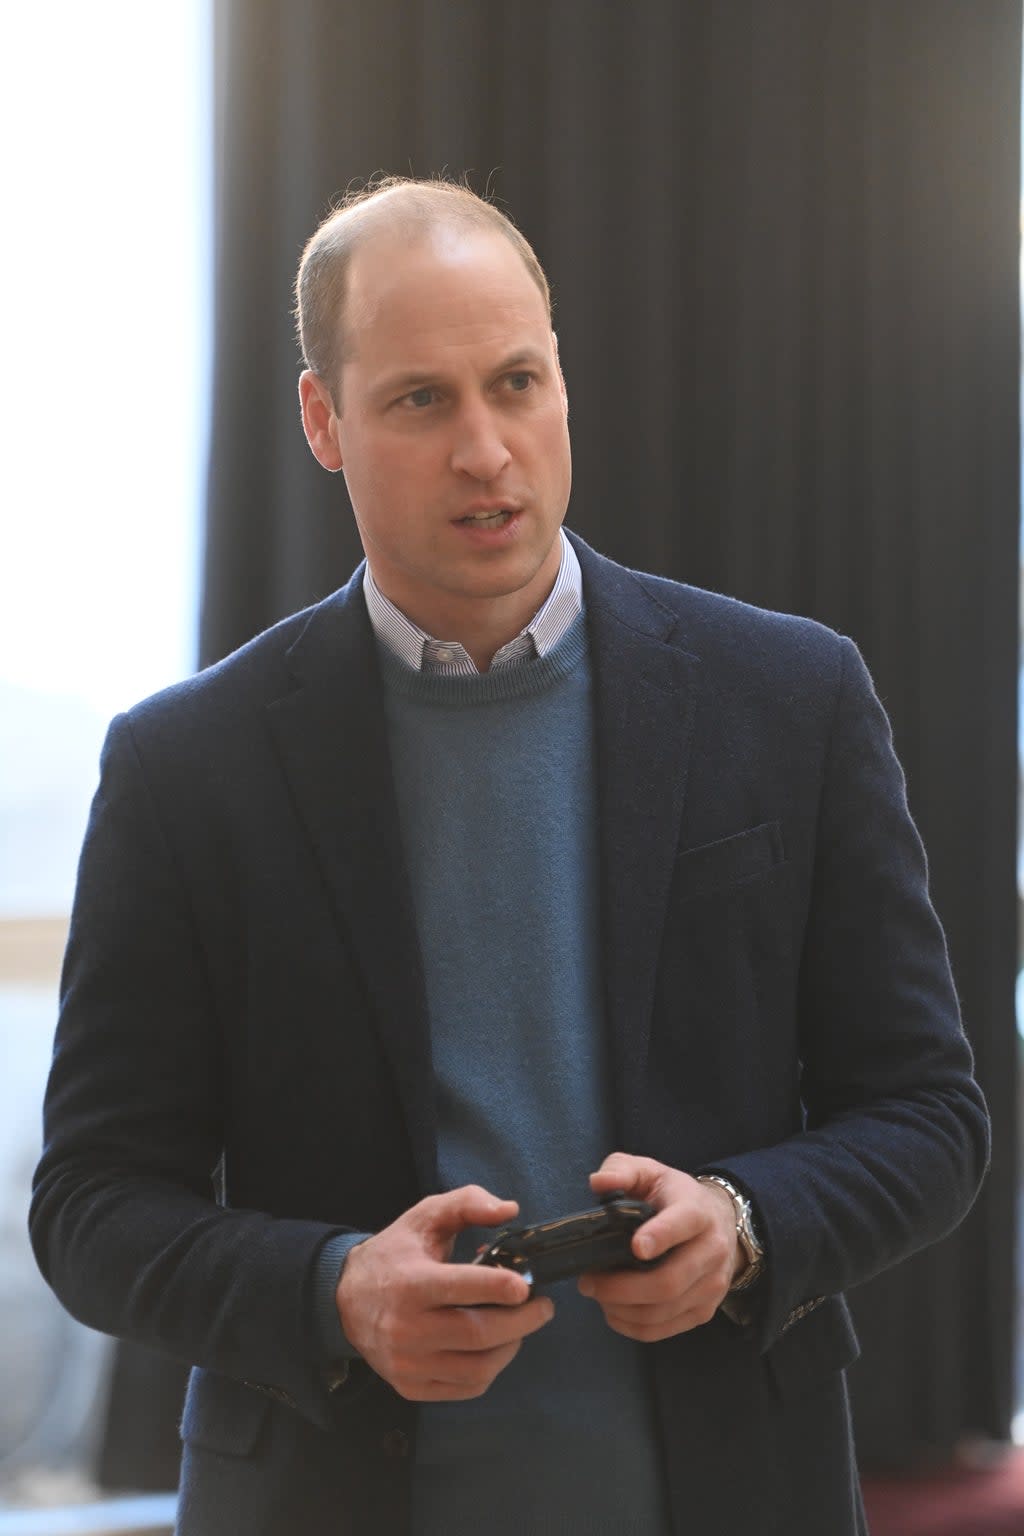 The Duke of Cambridge during a visit to Bafta in London (Paul Grover/Daily Telegraph/PA) (PA Wire)